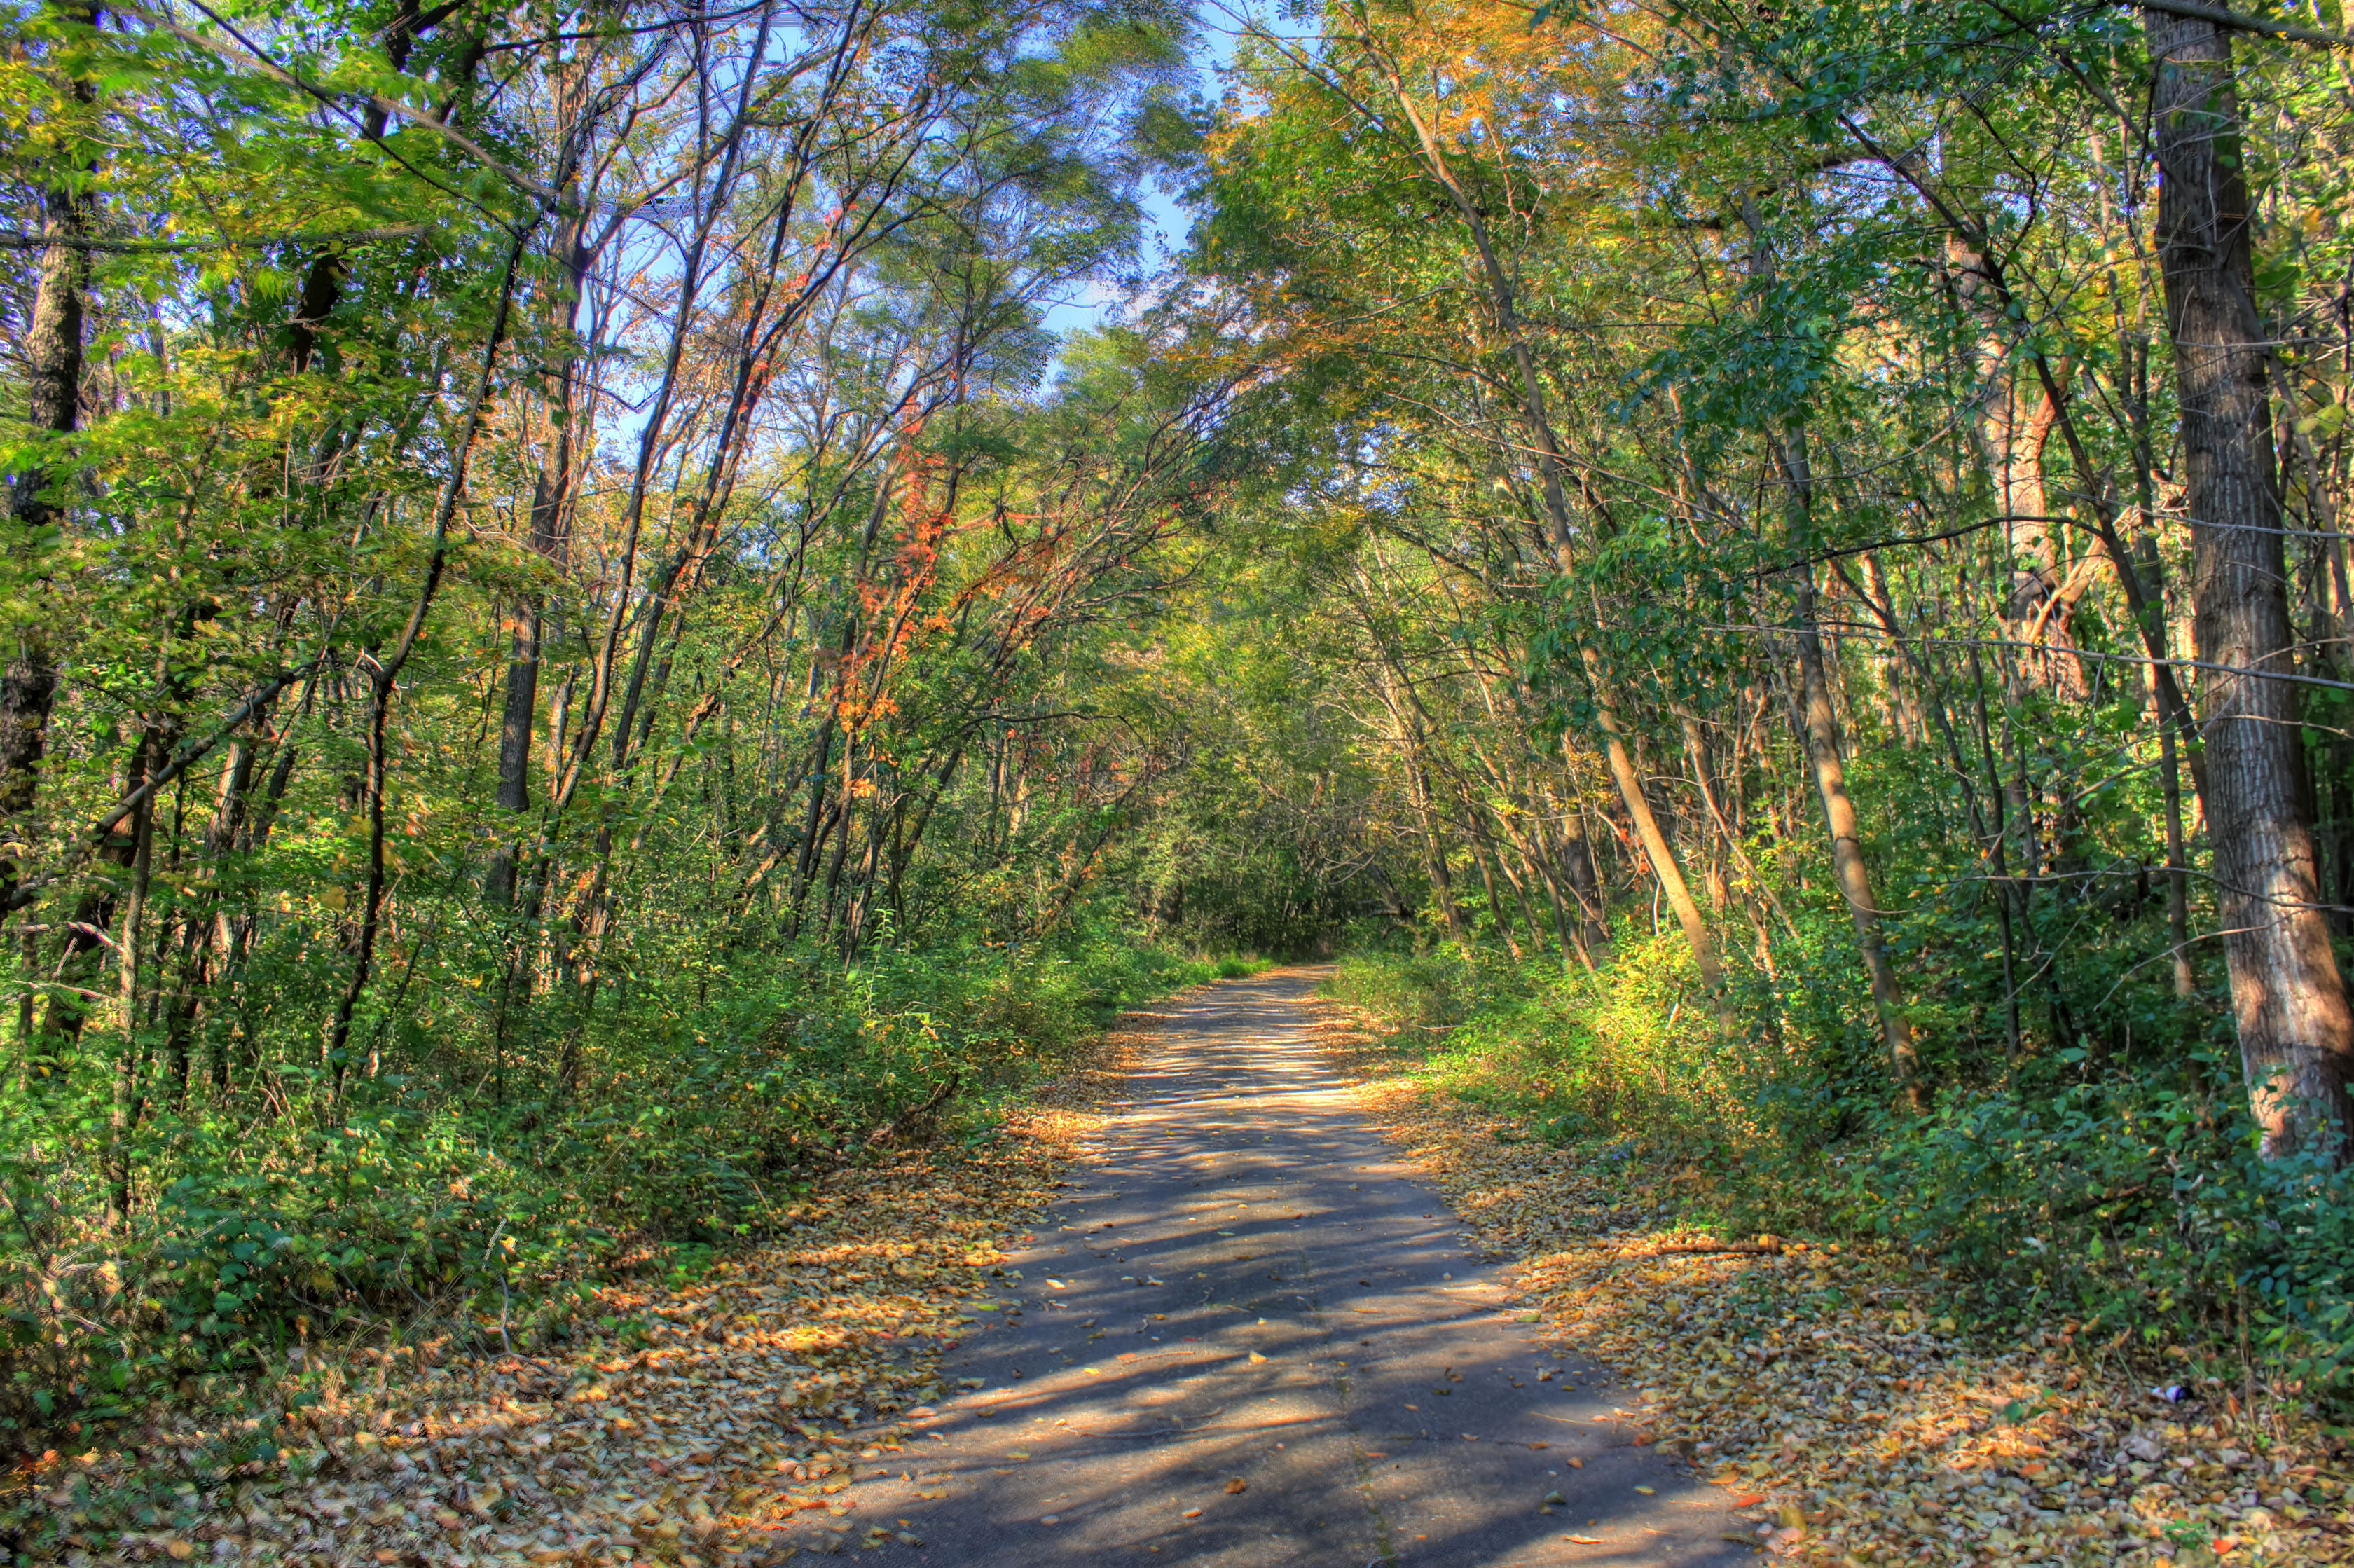 Paved Hiking Trail at Belmont Mounds State Park, Wisconsin image - Free stock photo - Public ...